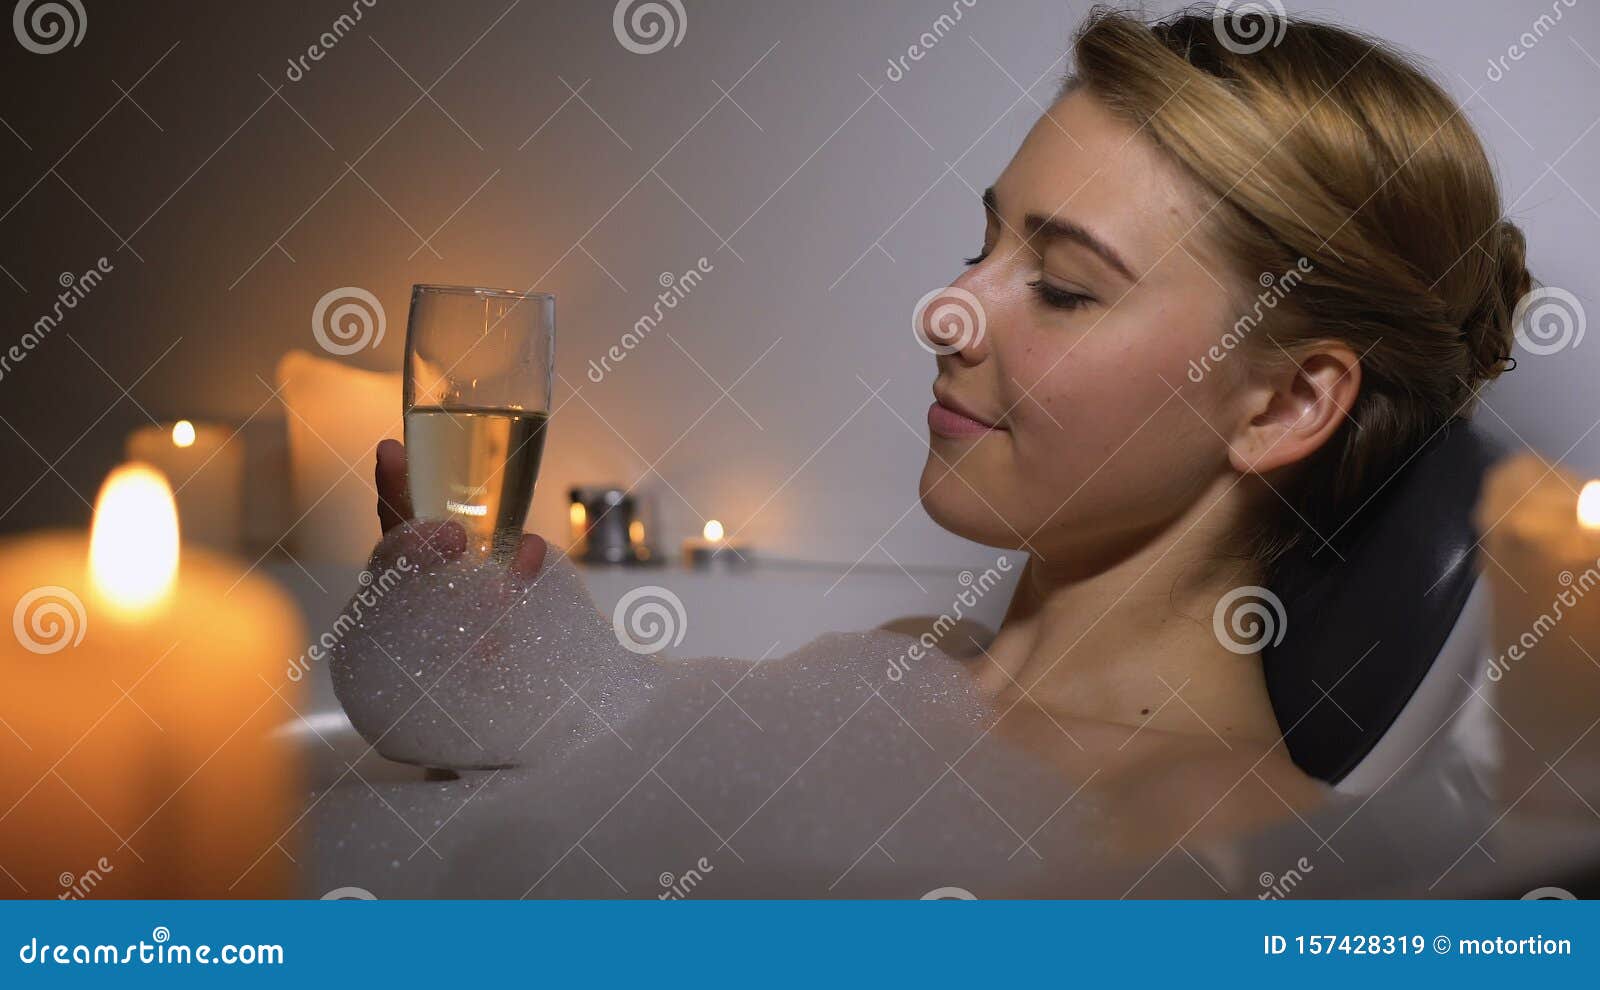 Dreamy Woman Lying In Bath With Foam Bubbles And Candles Drinking